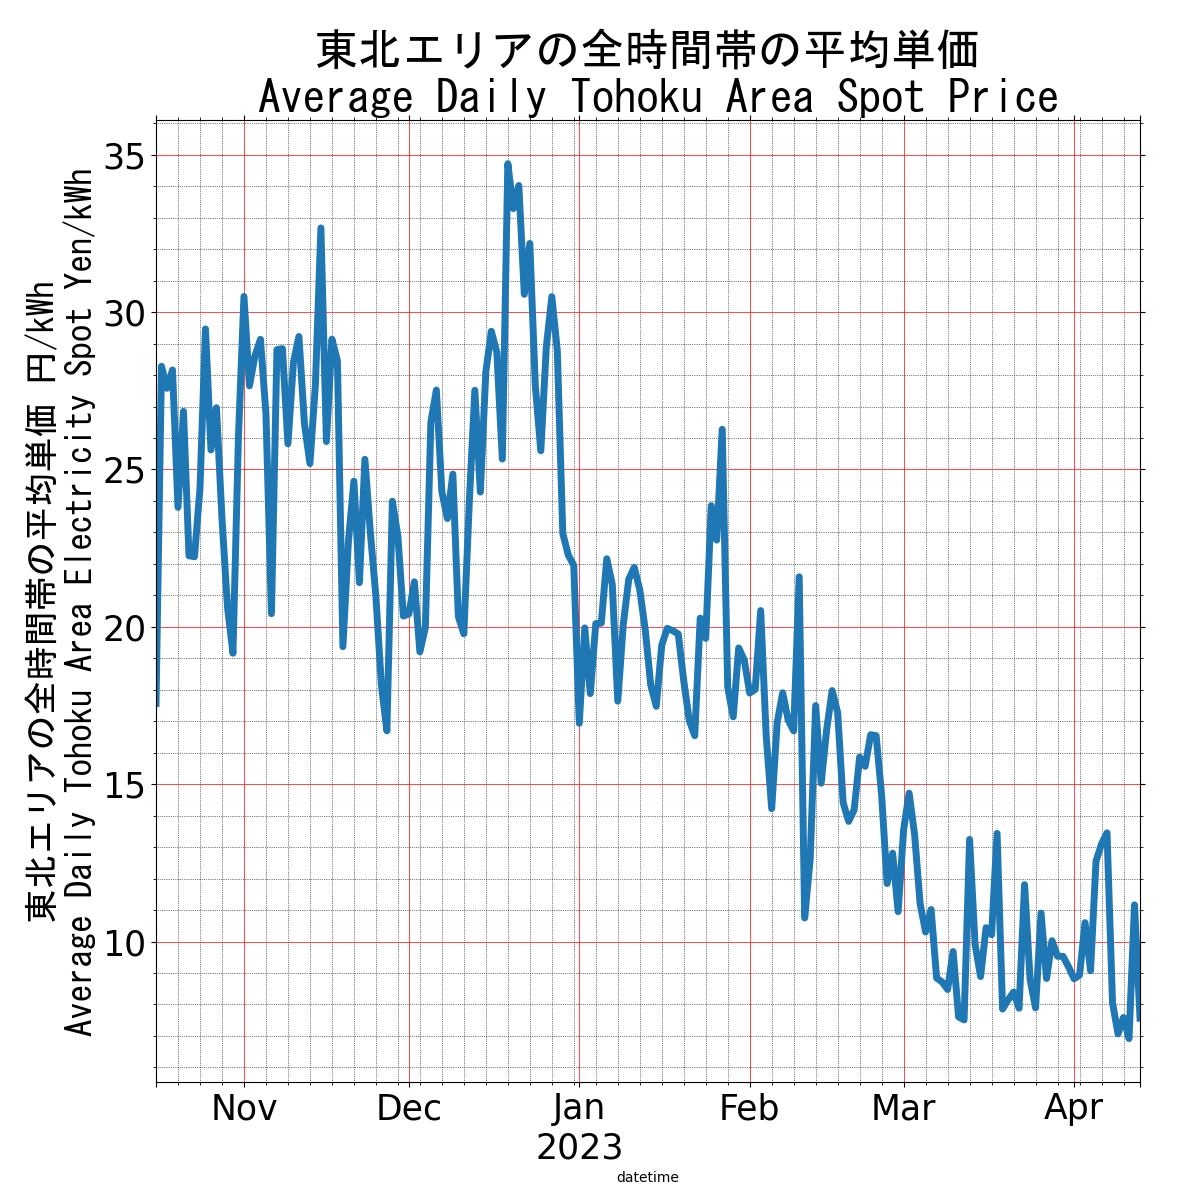 Japanese Electricity JEPX Tohoku Area Price plotted over time for the last 90 days